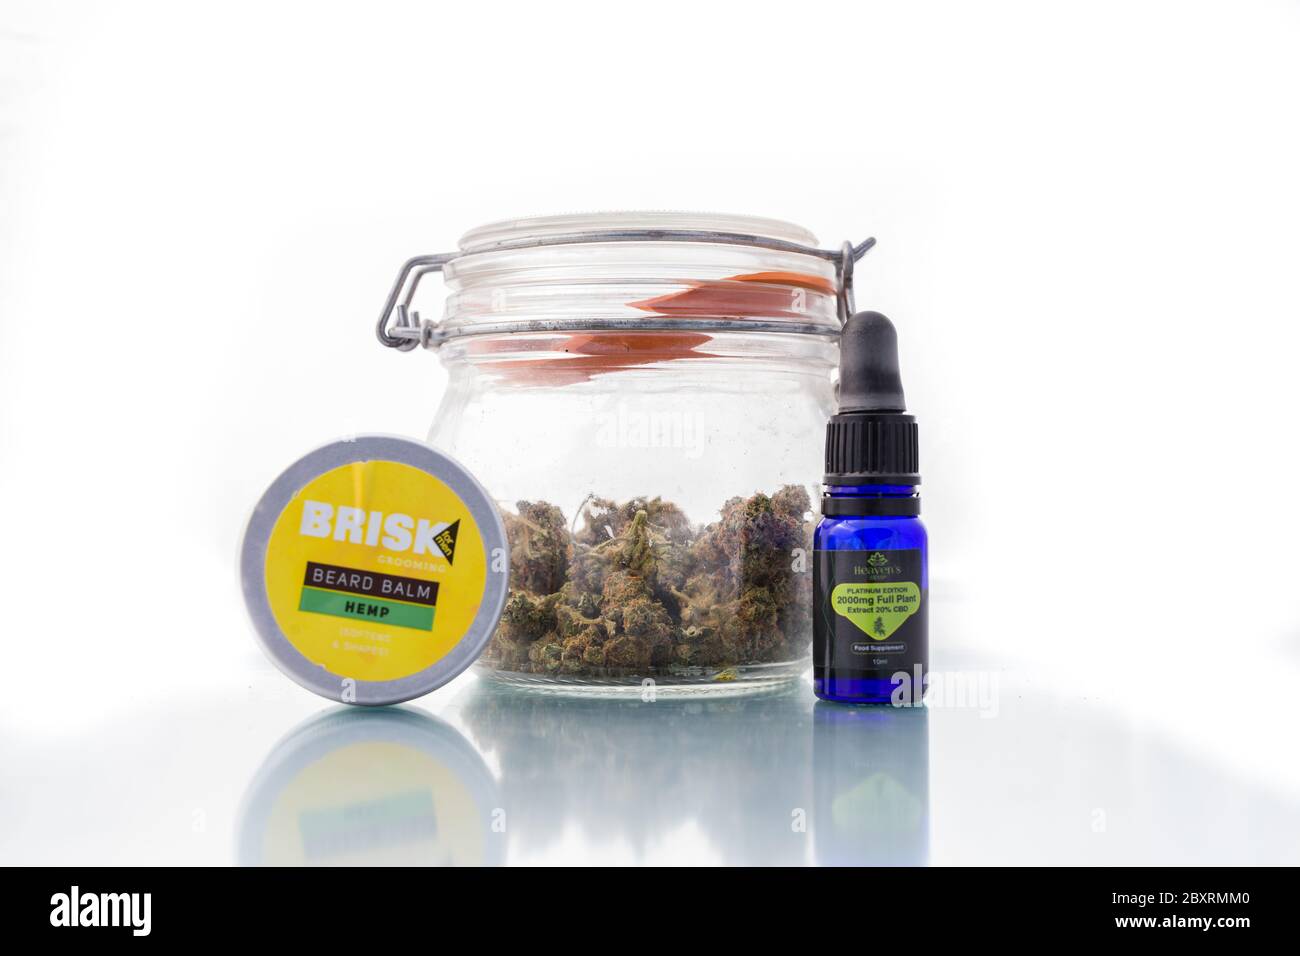 Suffolk, UK June 01 2020: A jar of cannabis along side some CBD products which are becoming ever more popular to the general public. Stock Photo